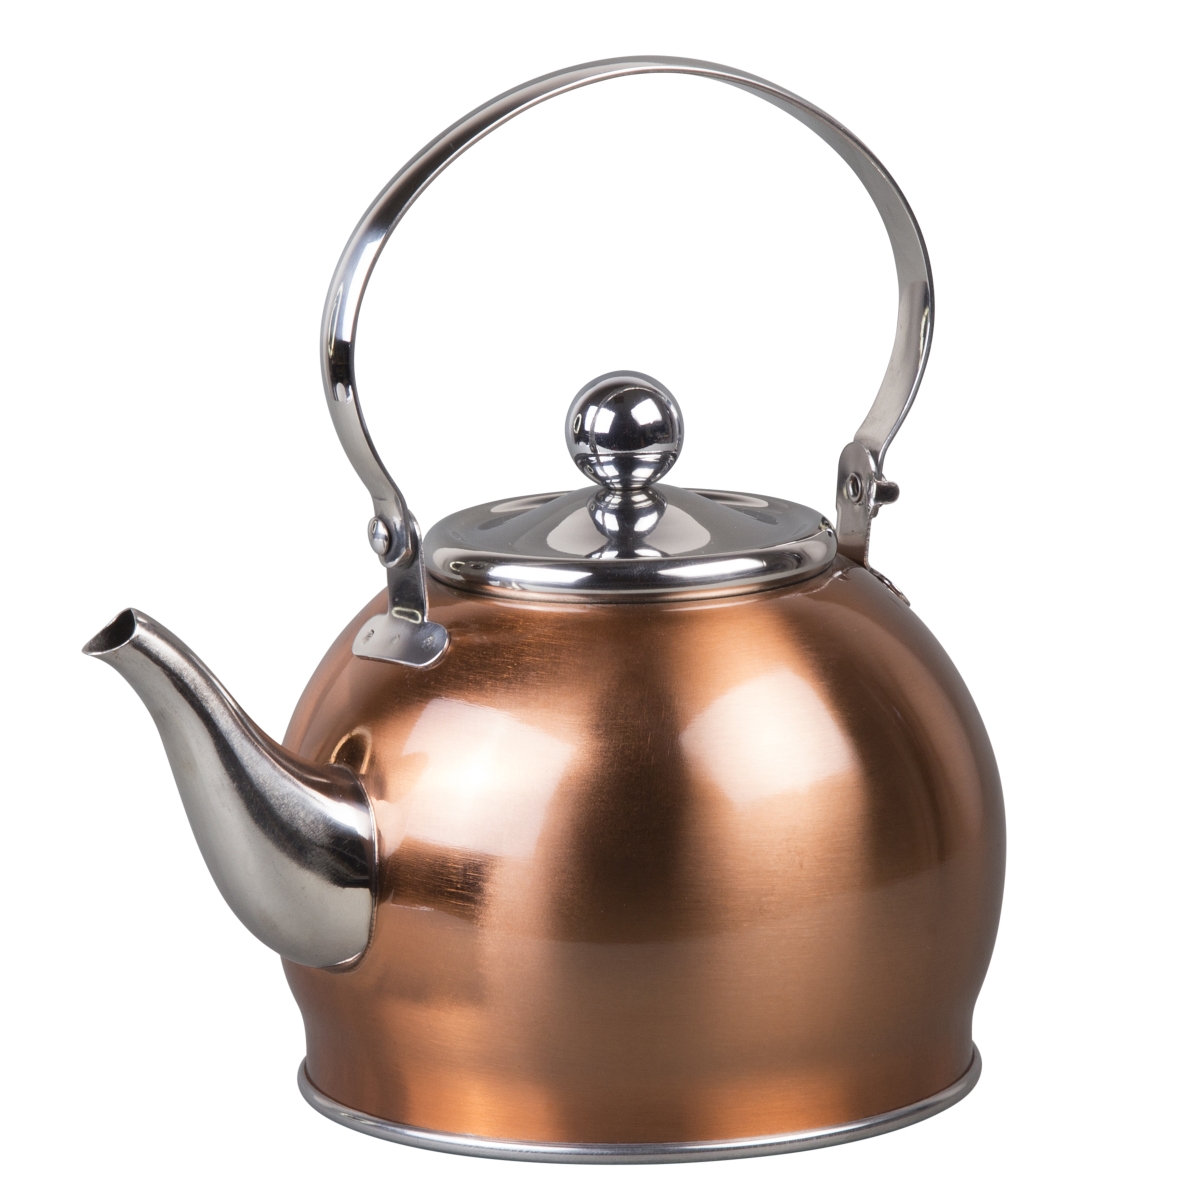 1 qt. Royal Stainless Steel Tea Kettle with Removable Infuser Basket & Folding Handle - Cooper